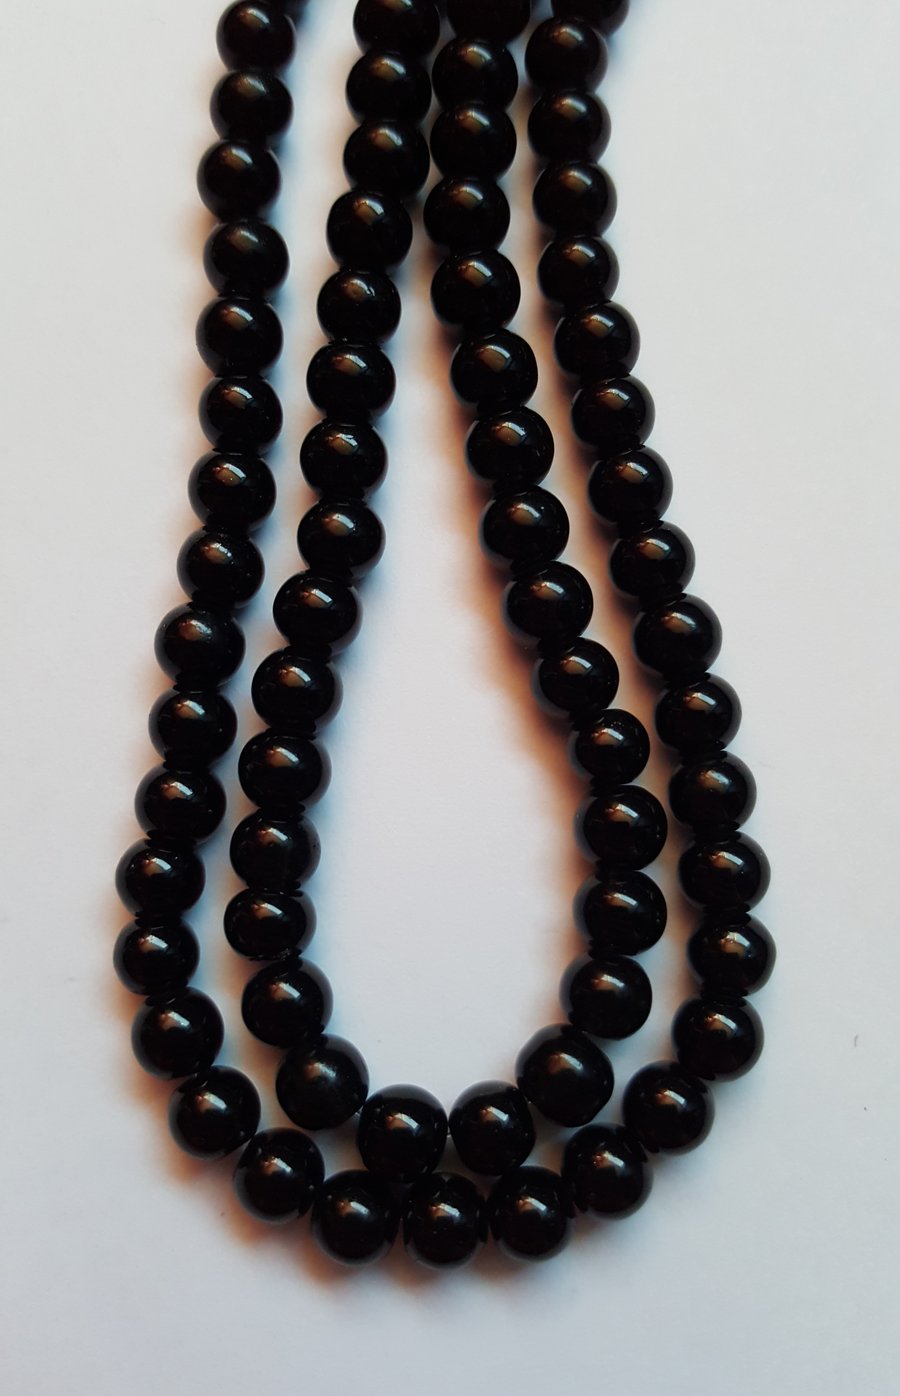 50 x Baked Glass Beads - Round - 6mm - Black 